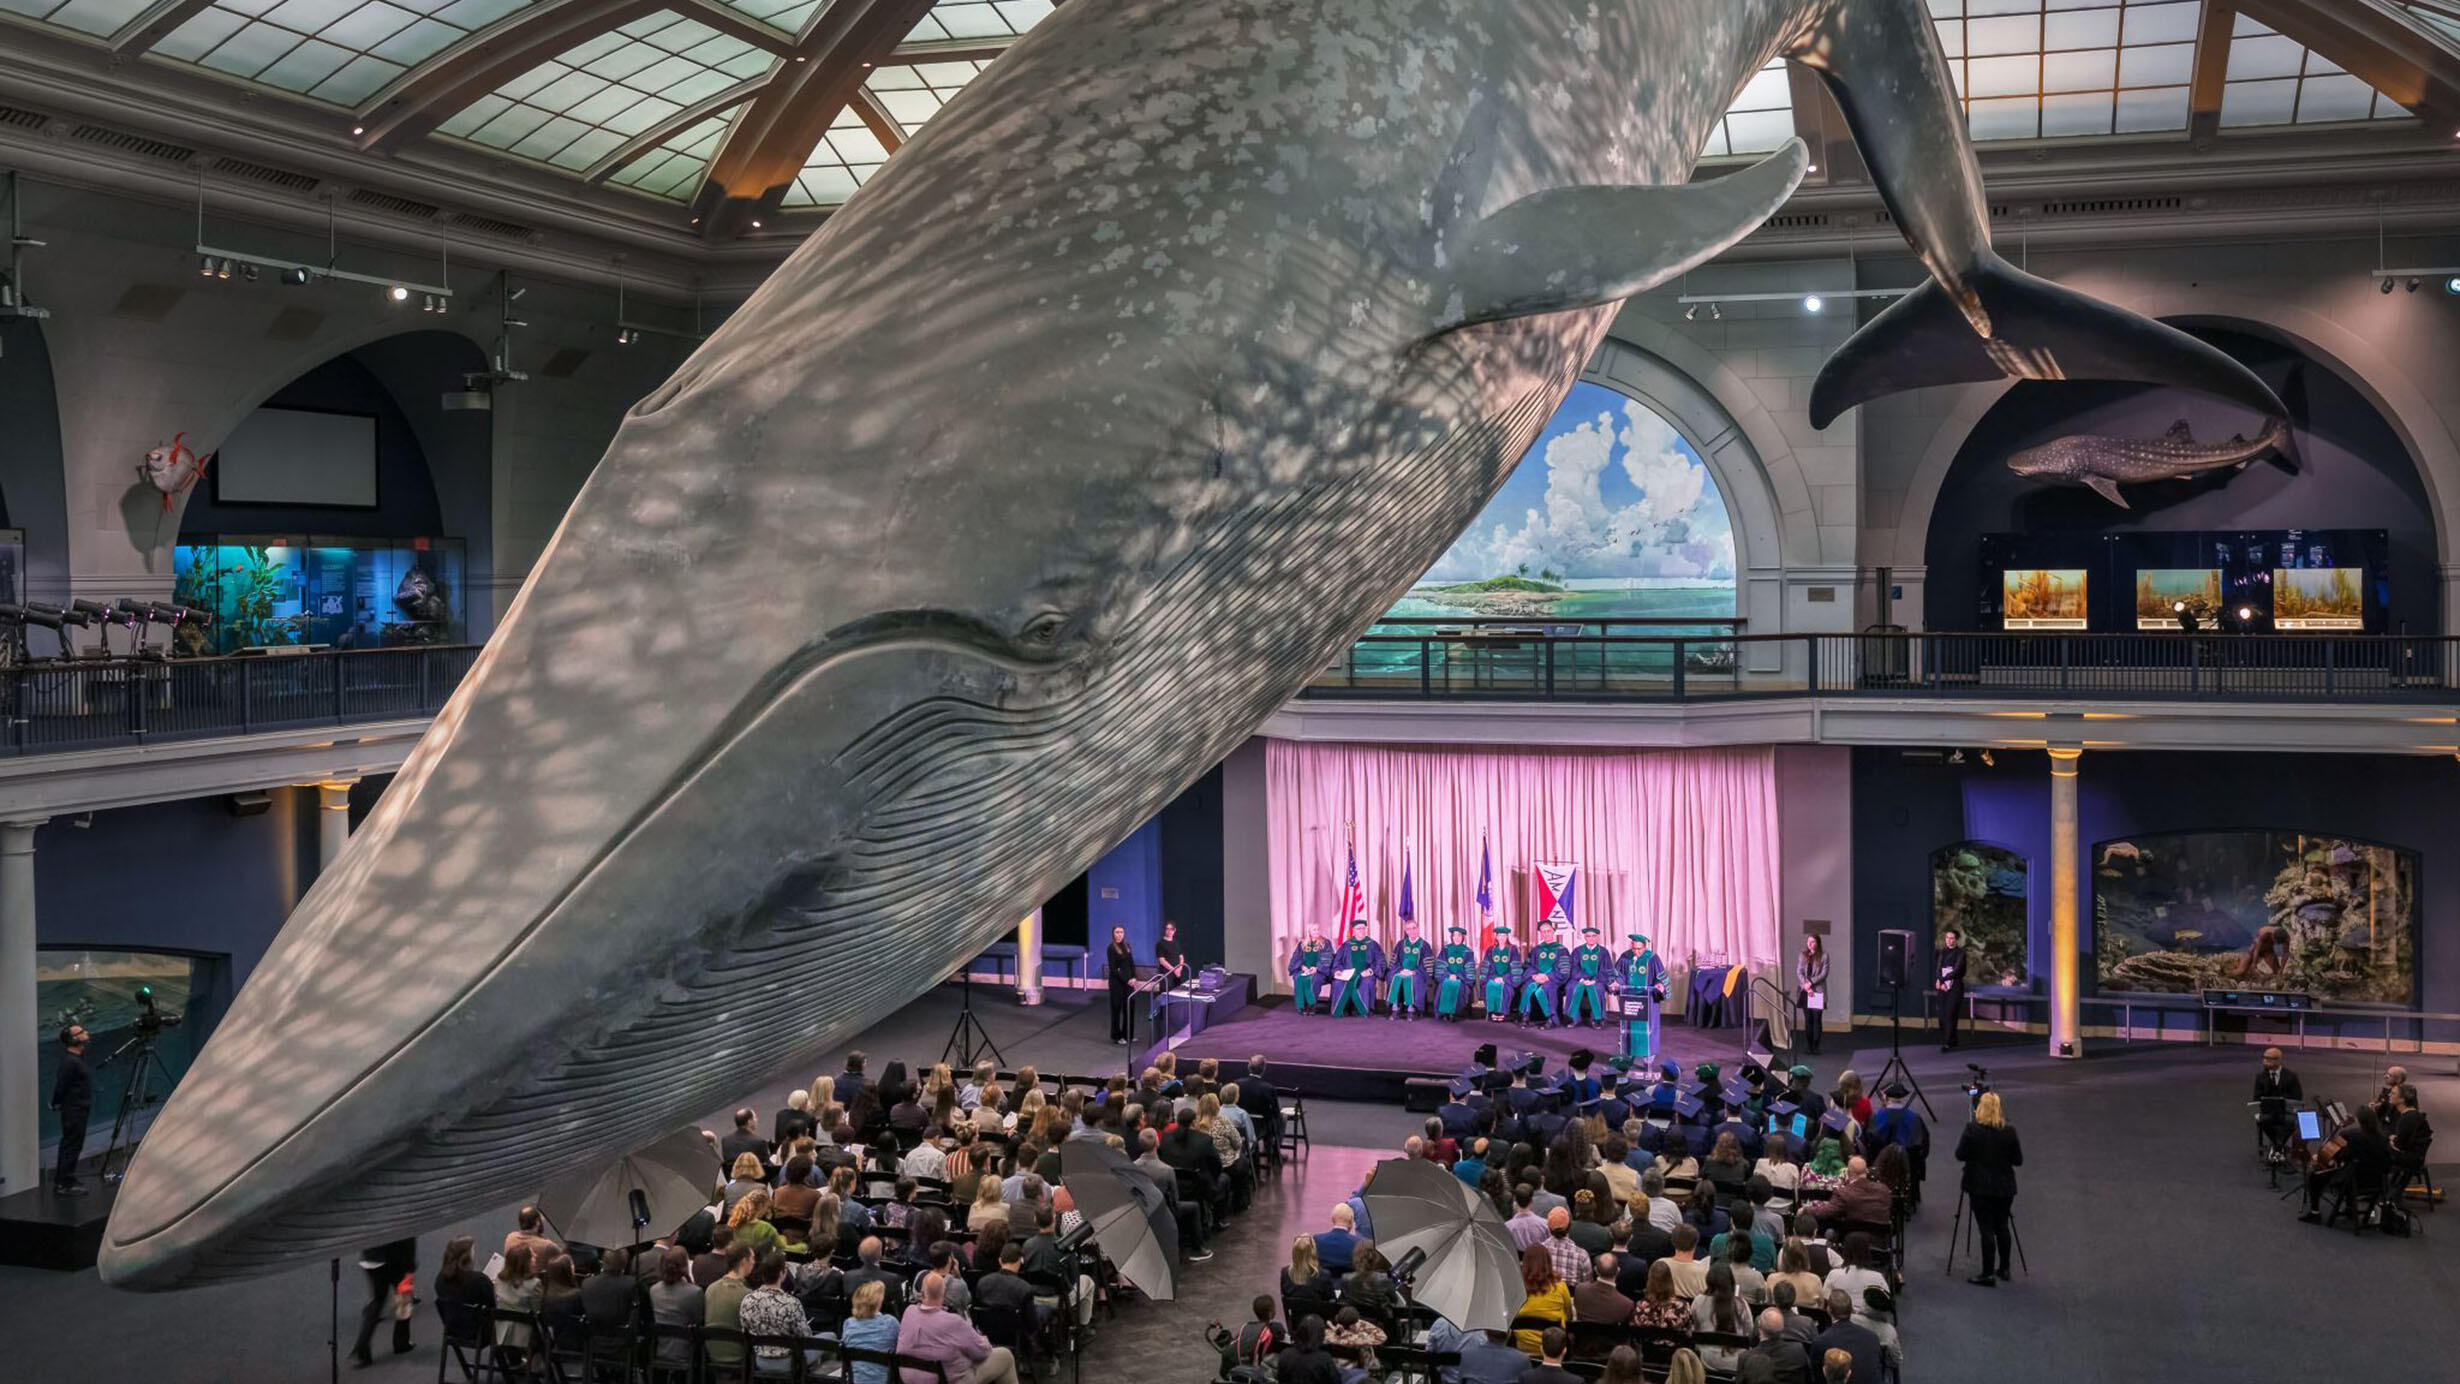 Graduates of the Richard Gilder Graduate School sit on a stage below the blue whale in the Milstein Hall of Ocean Life in front of a seated audience.